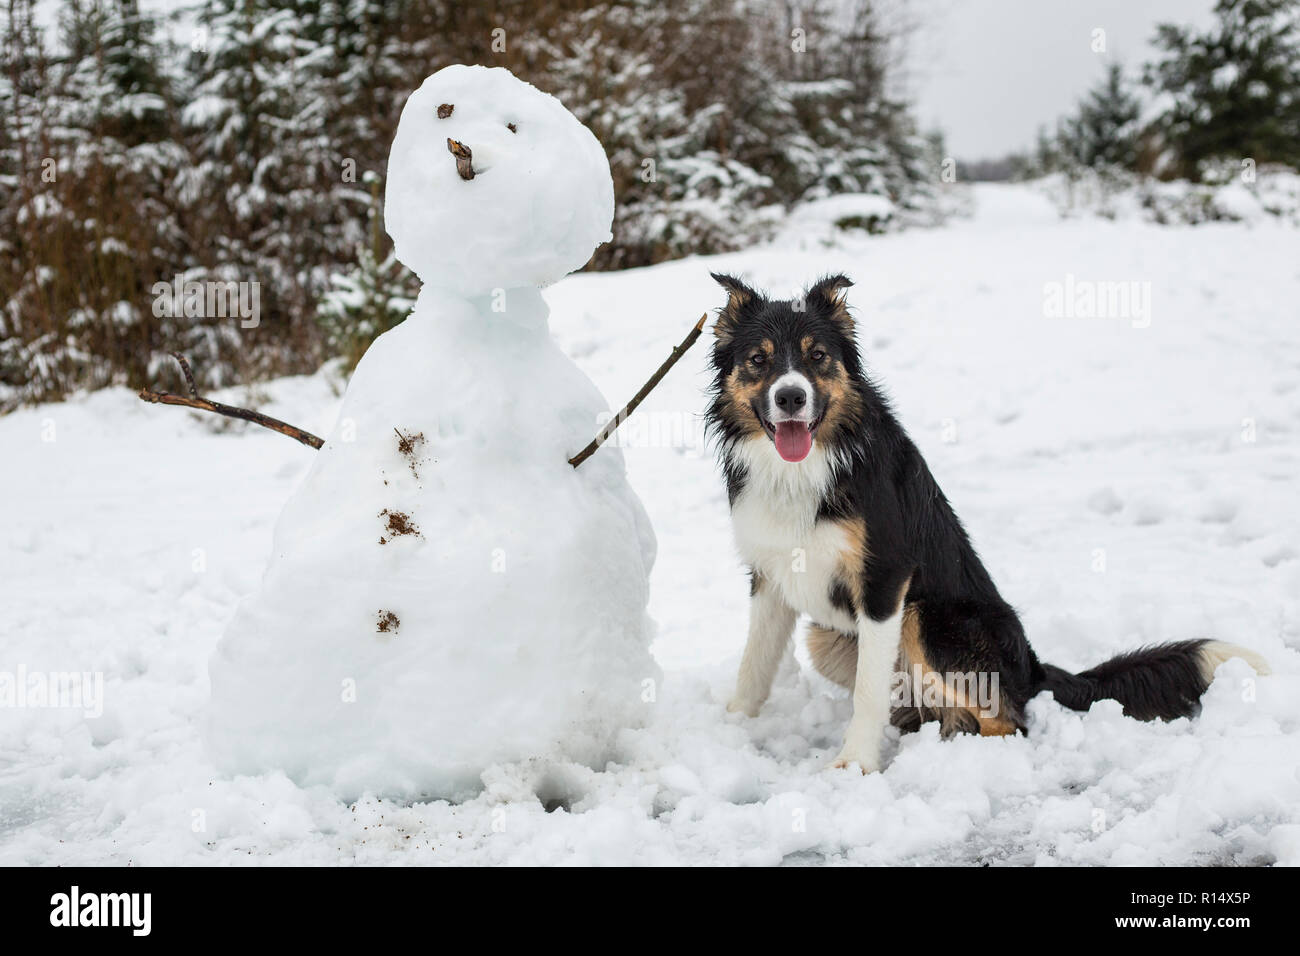 A tricoloured border collie sitting next to a snowman in a snow covered scene Stock Photo